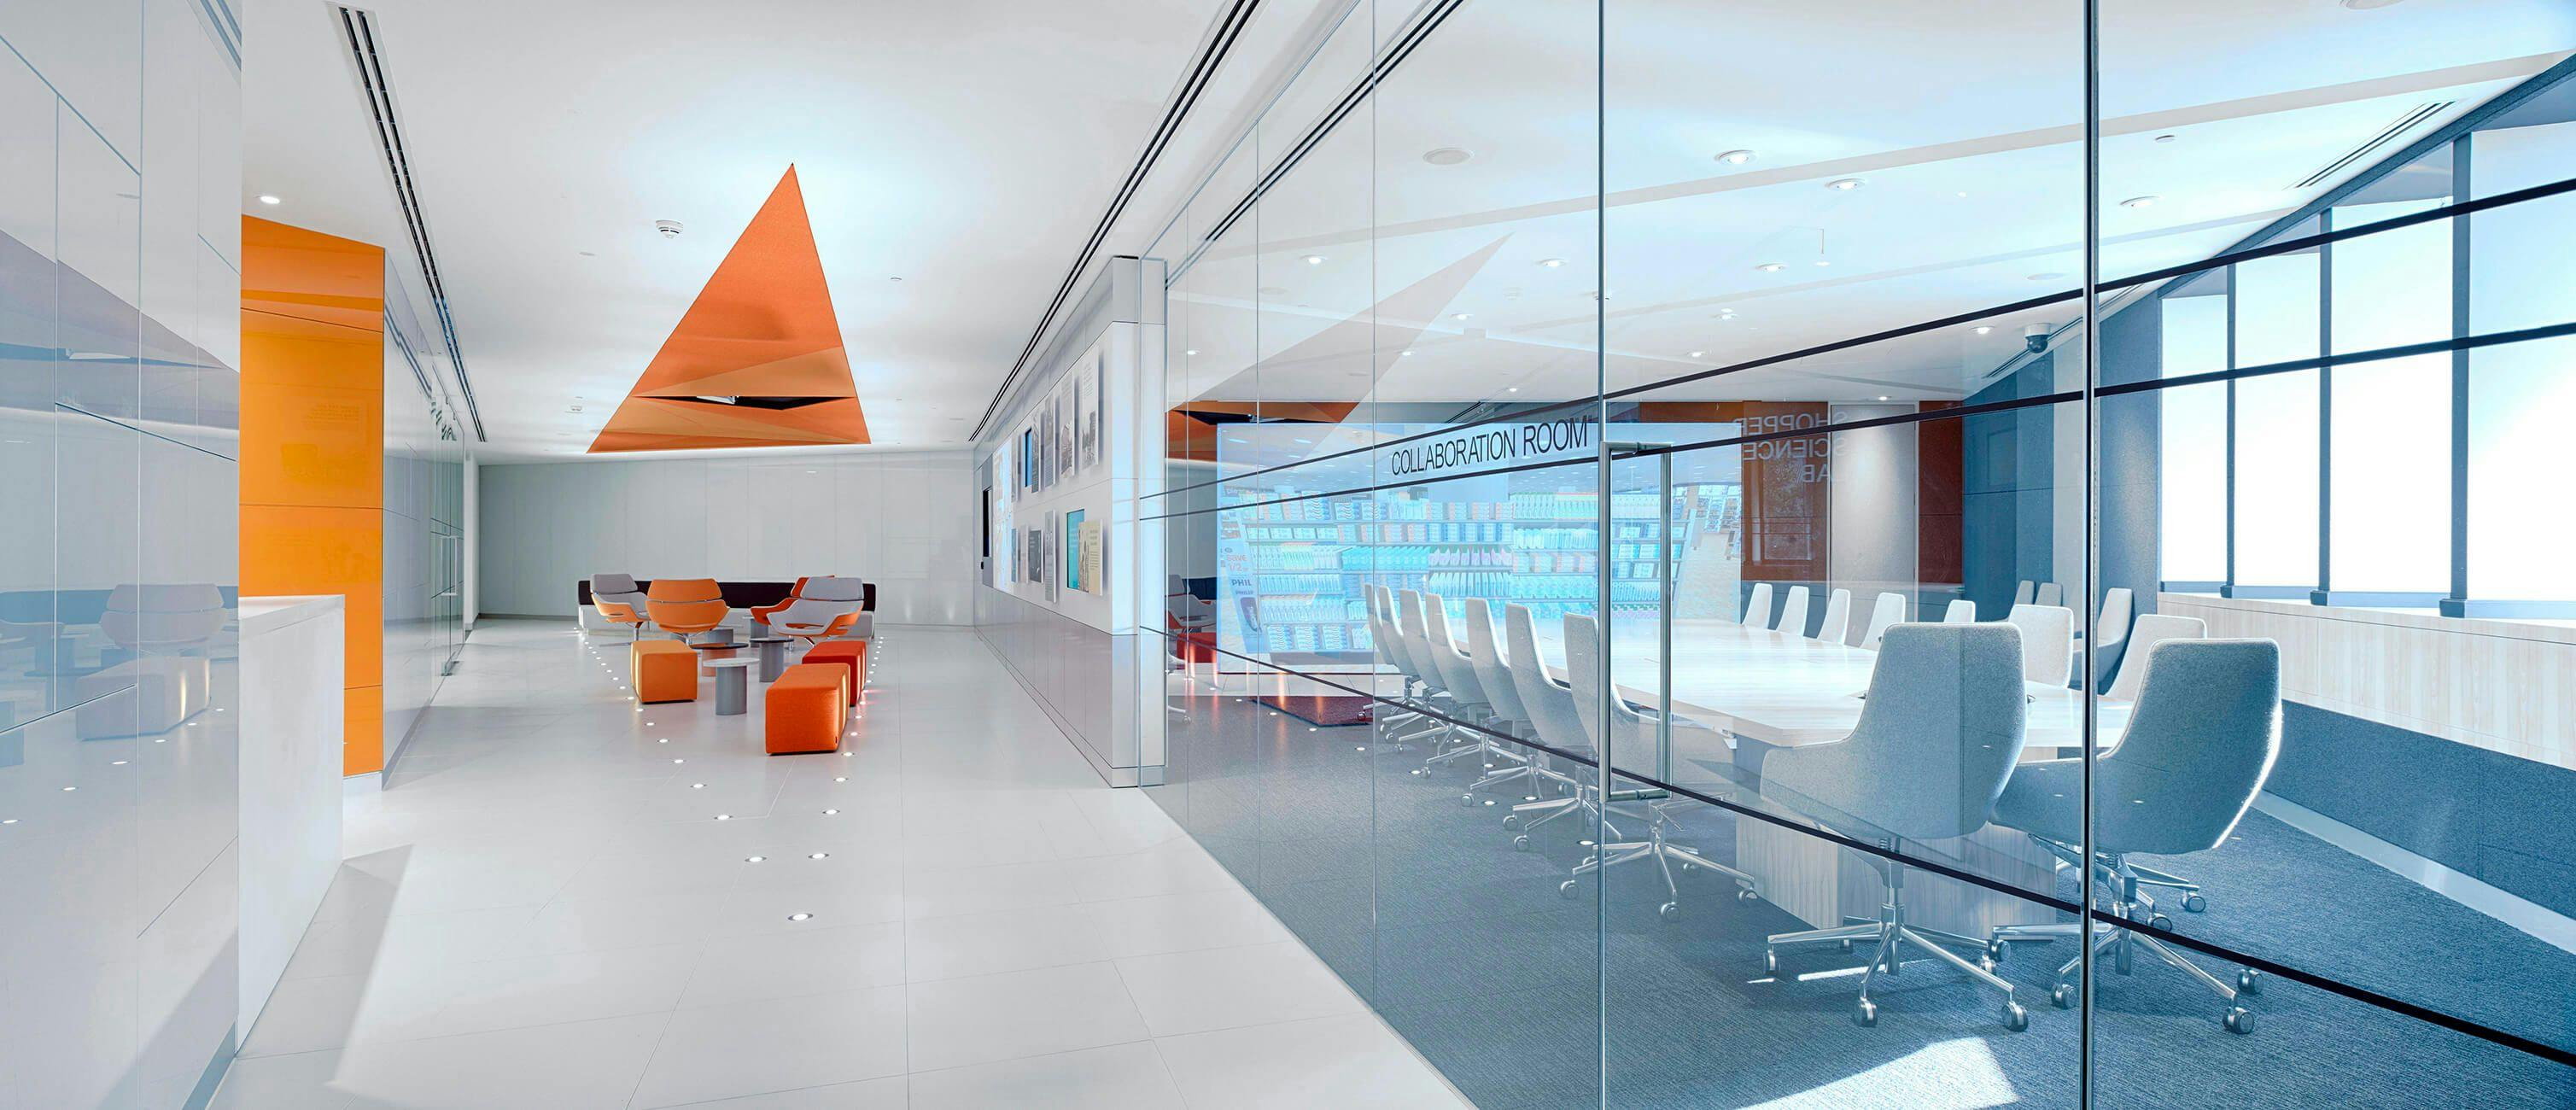 Interior of the GSK Shopper Science Lab